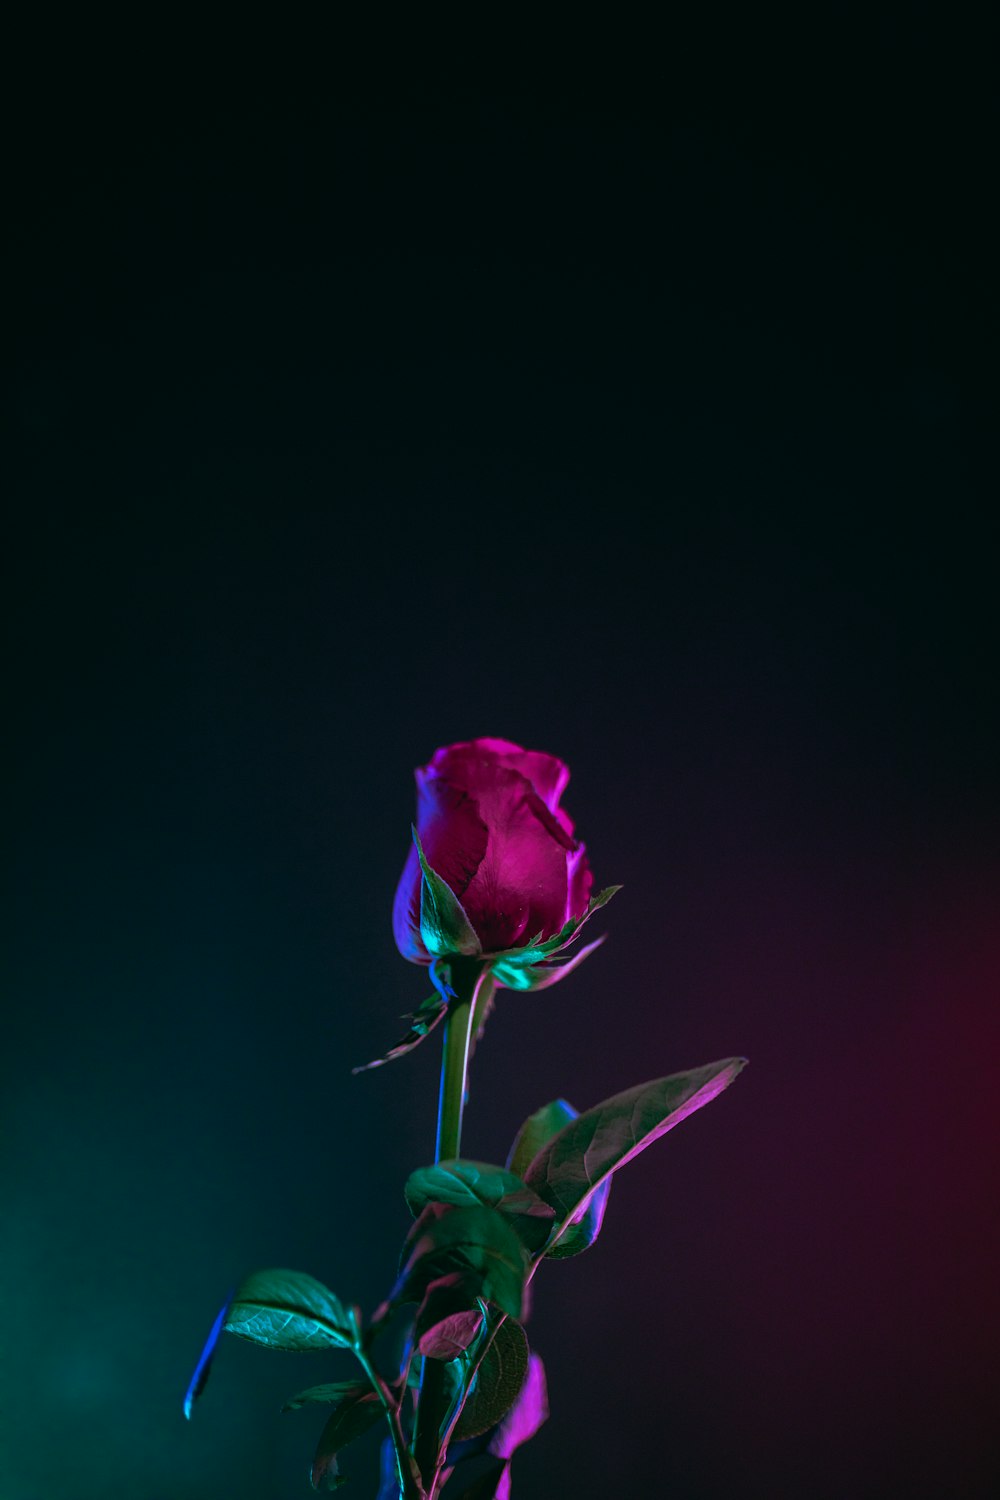 pink roses bloom with water drops photo – Free Flower Image on Unsplash